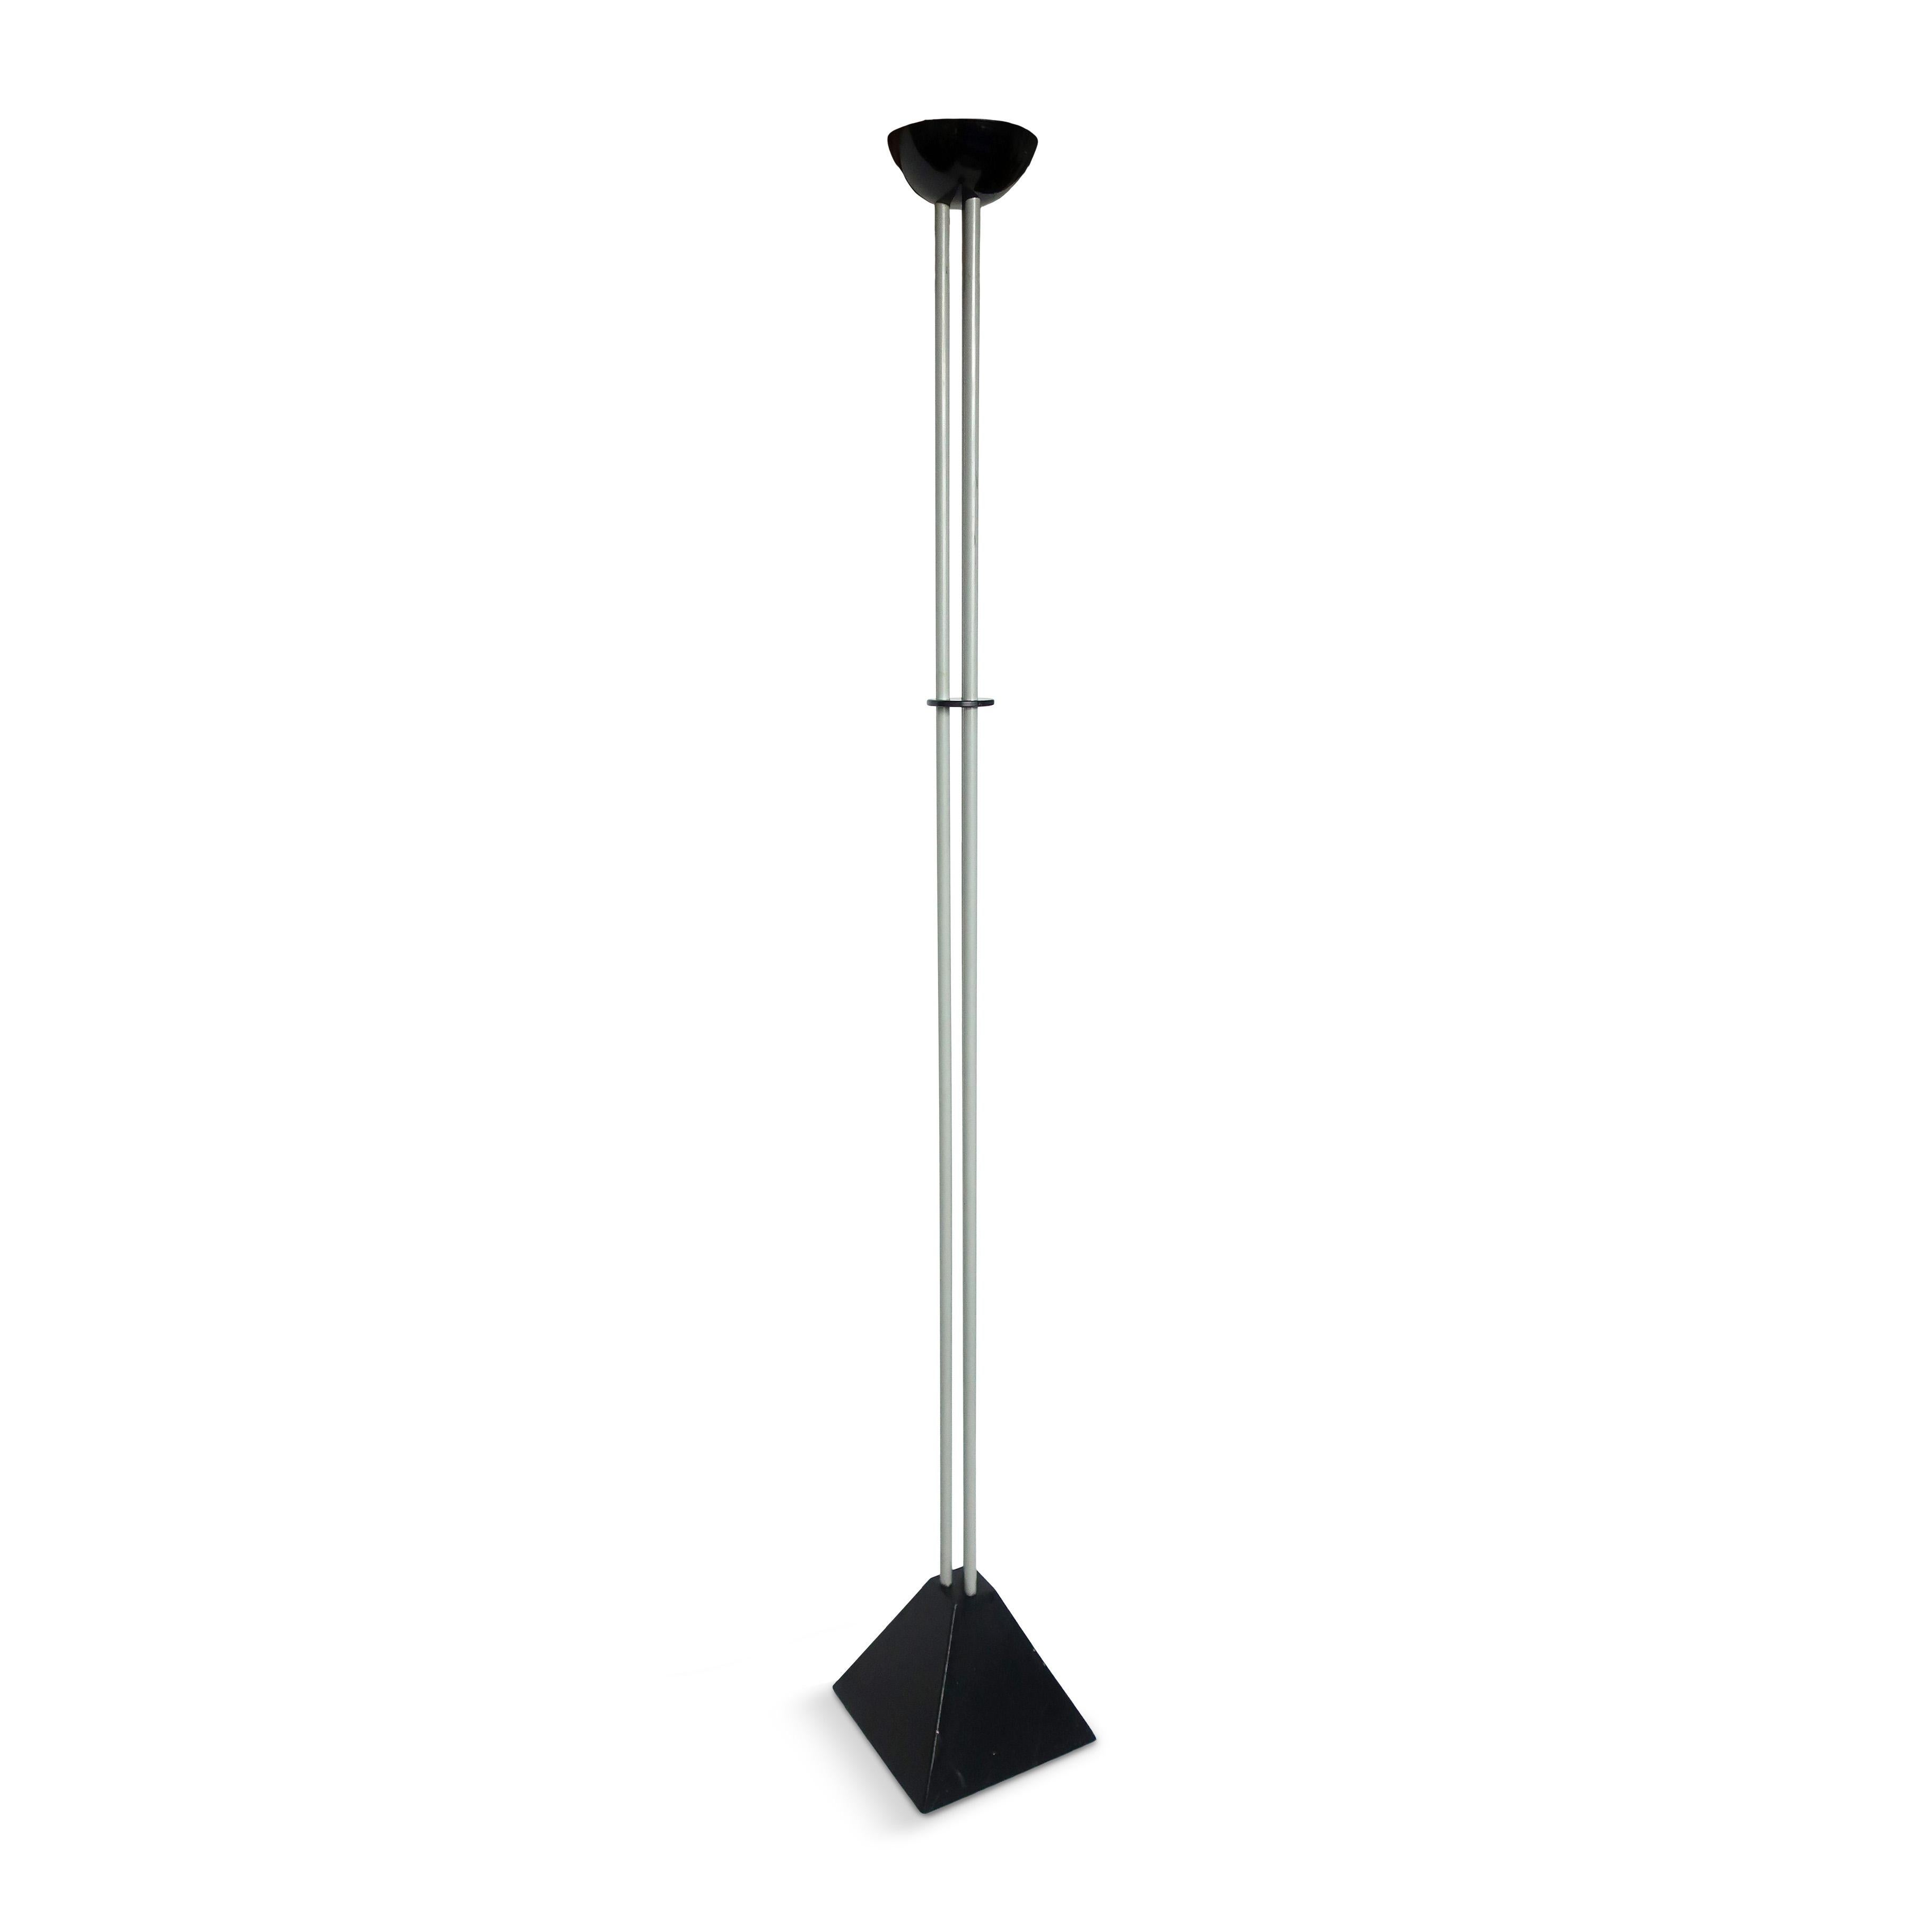 A 1980s postmodern and minimalist black and gray torchiere floor lamp designed by Ron Rezek, the West Coast American lighting kingpin known for his many iconic designs produced by his eponymous company and Italian heavyweight Artemide. This